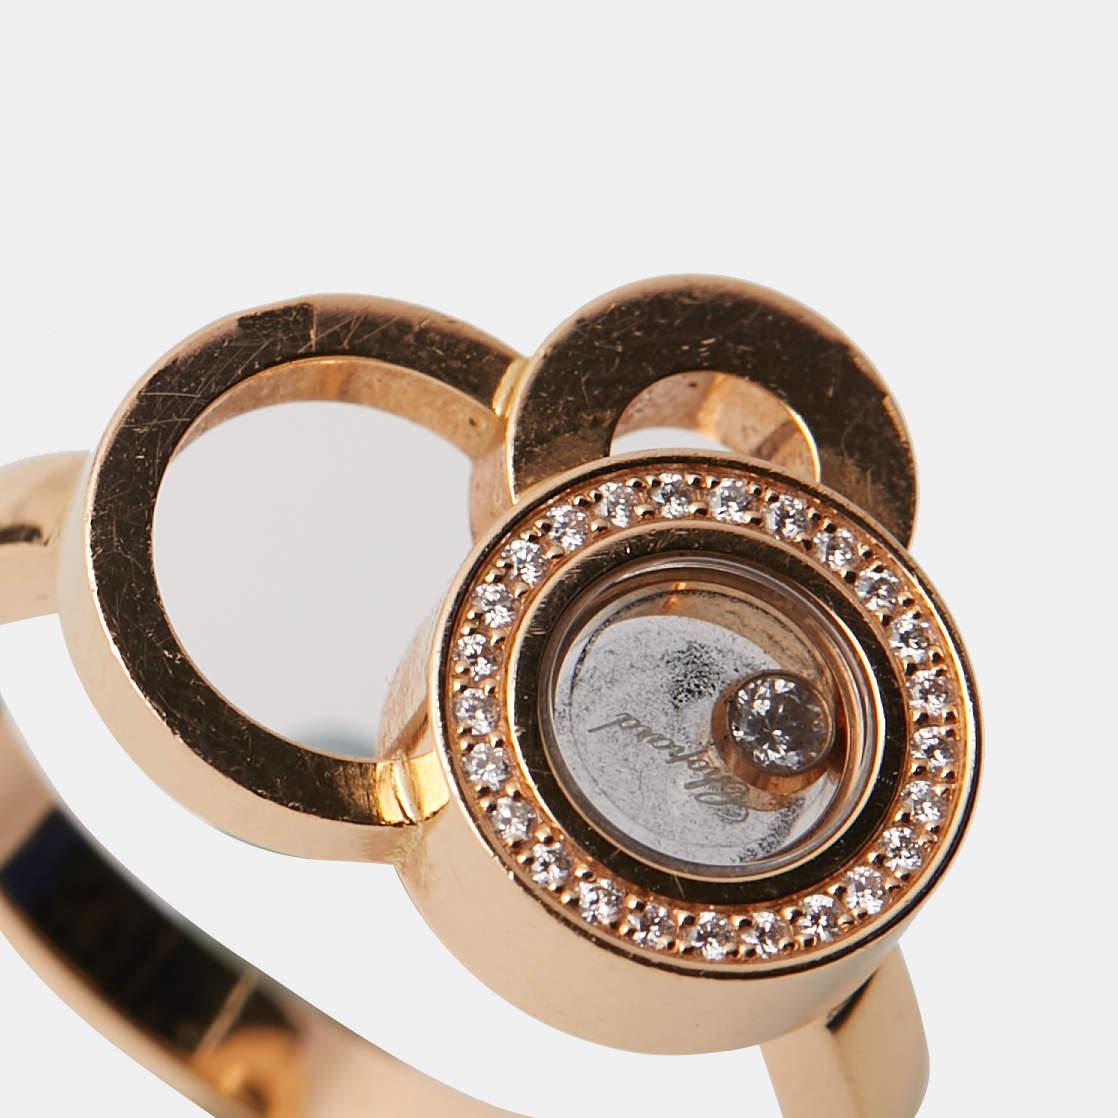 Made from 18k rose gold, this ring is from the Chopard Happy Bubbles collection. It is styled with little circles to resemble bubbles and finished with an encased diamond that moves with you. Add a dazzling finish with this splendid piece from